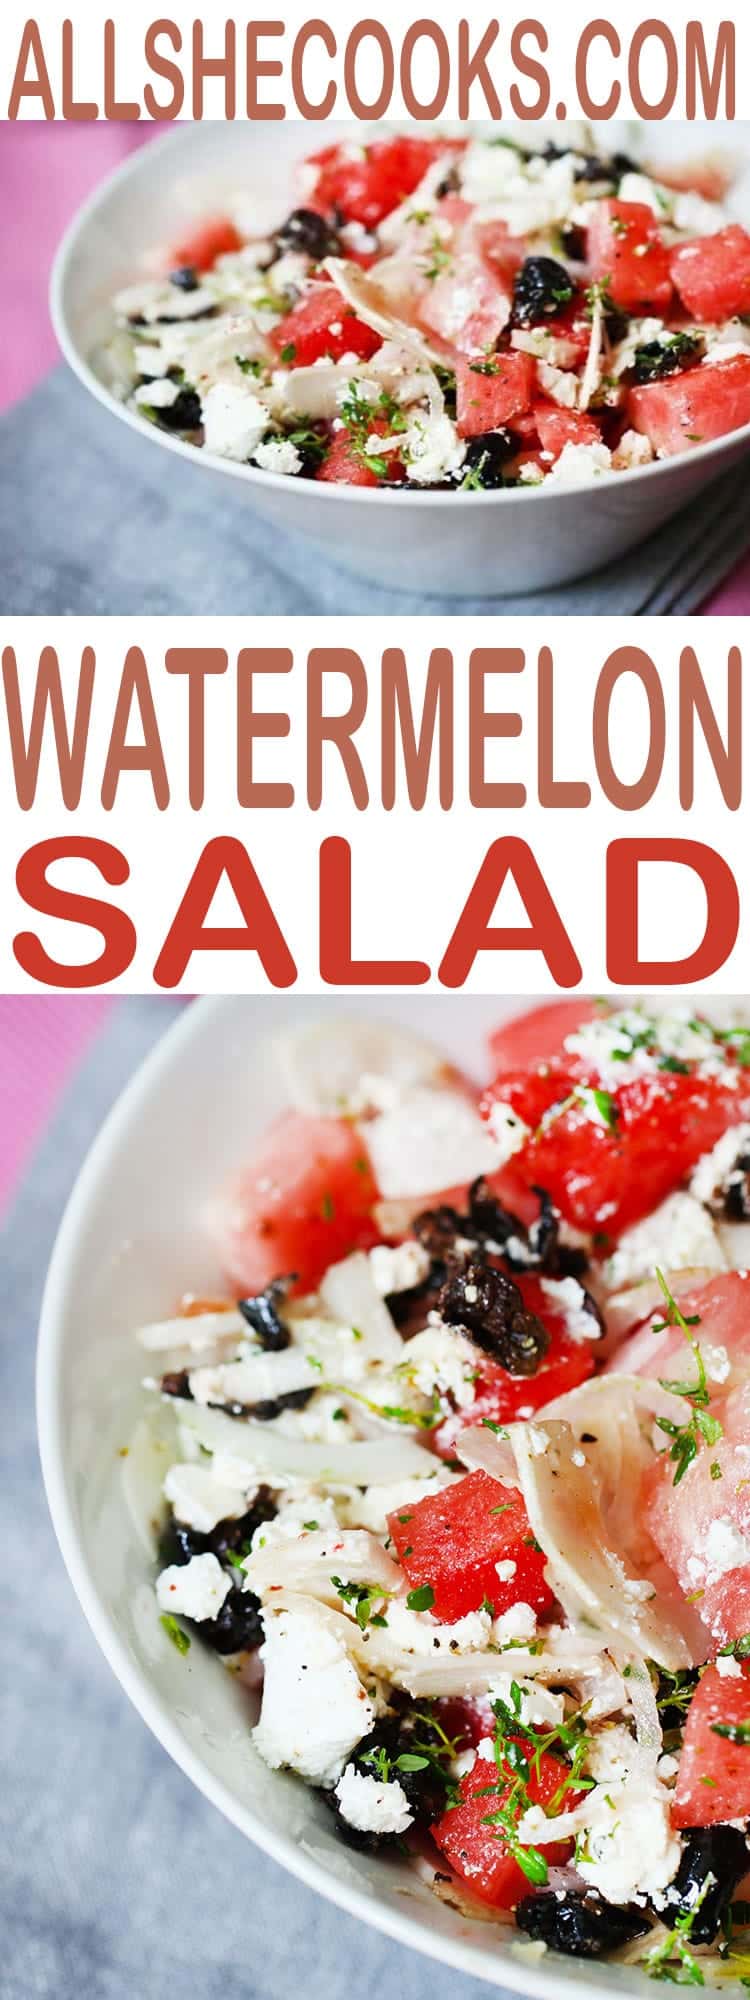 Easy Watermelon Summer salad recipe that is a perfect bbq salad recipe. Take this to share and everyone will ask for the recipe. It's that good!